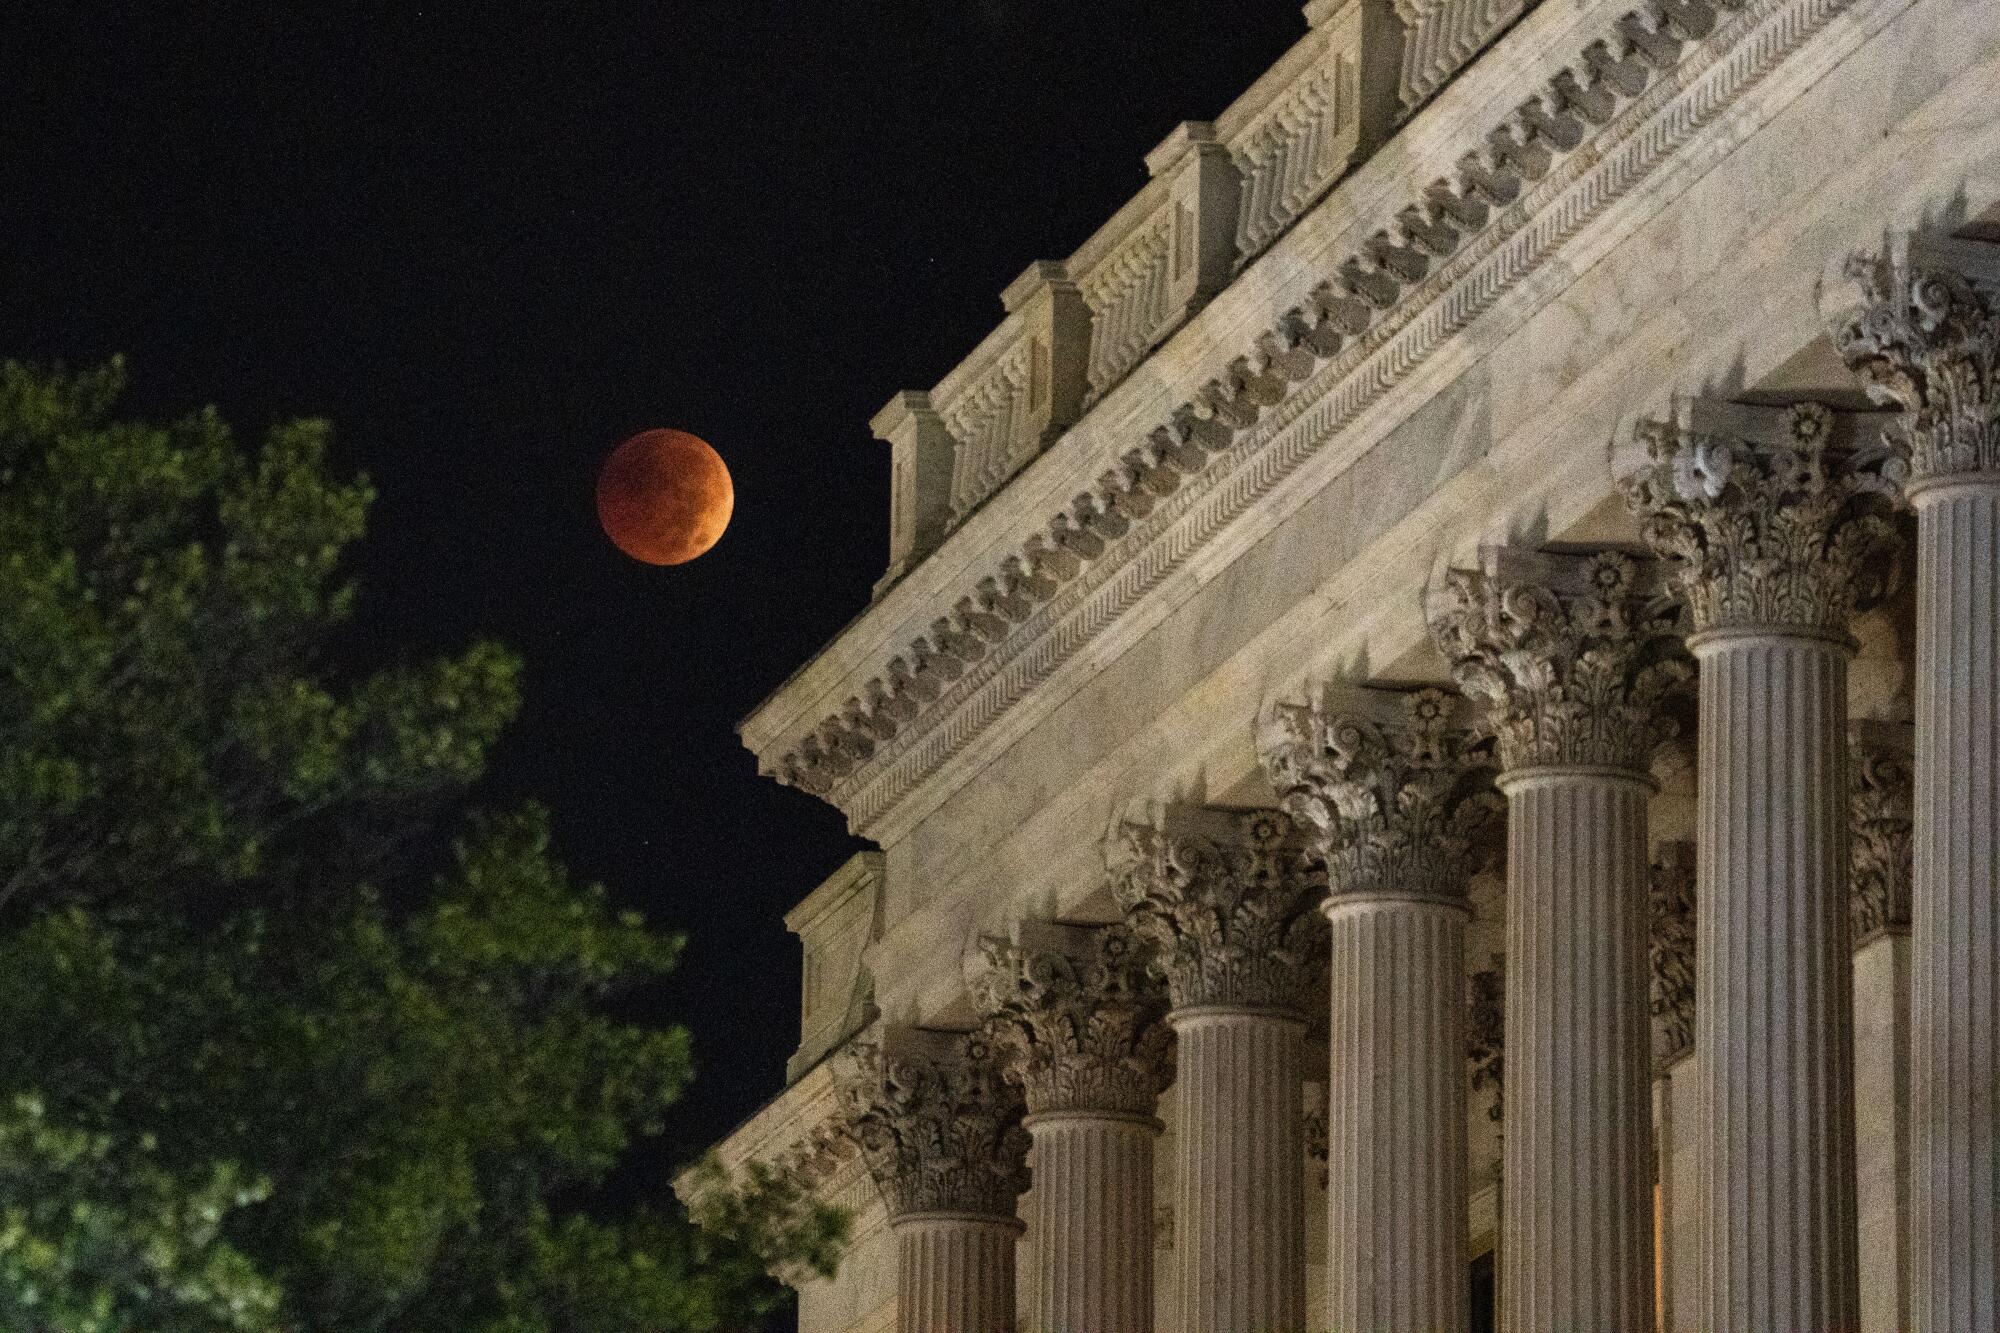 A blood moon lunar eclipse appears to hover beyond the U.S. Capitol Building in Washington, D.C.